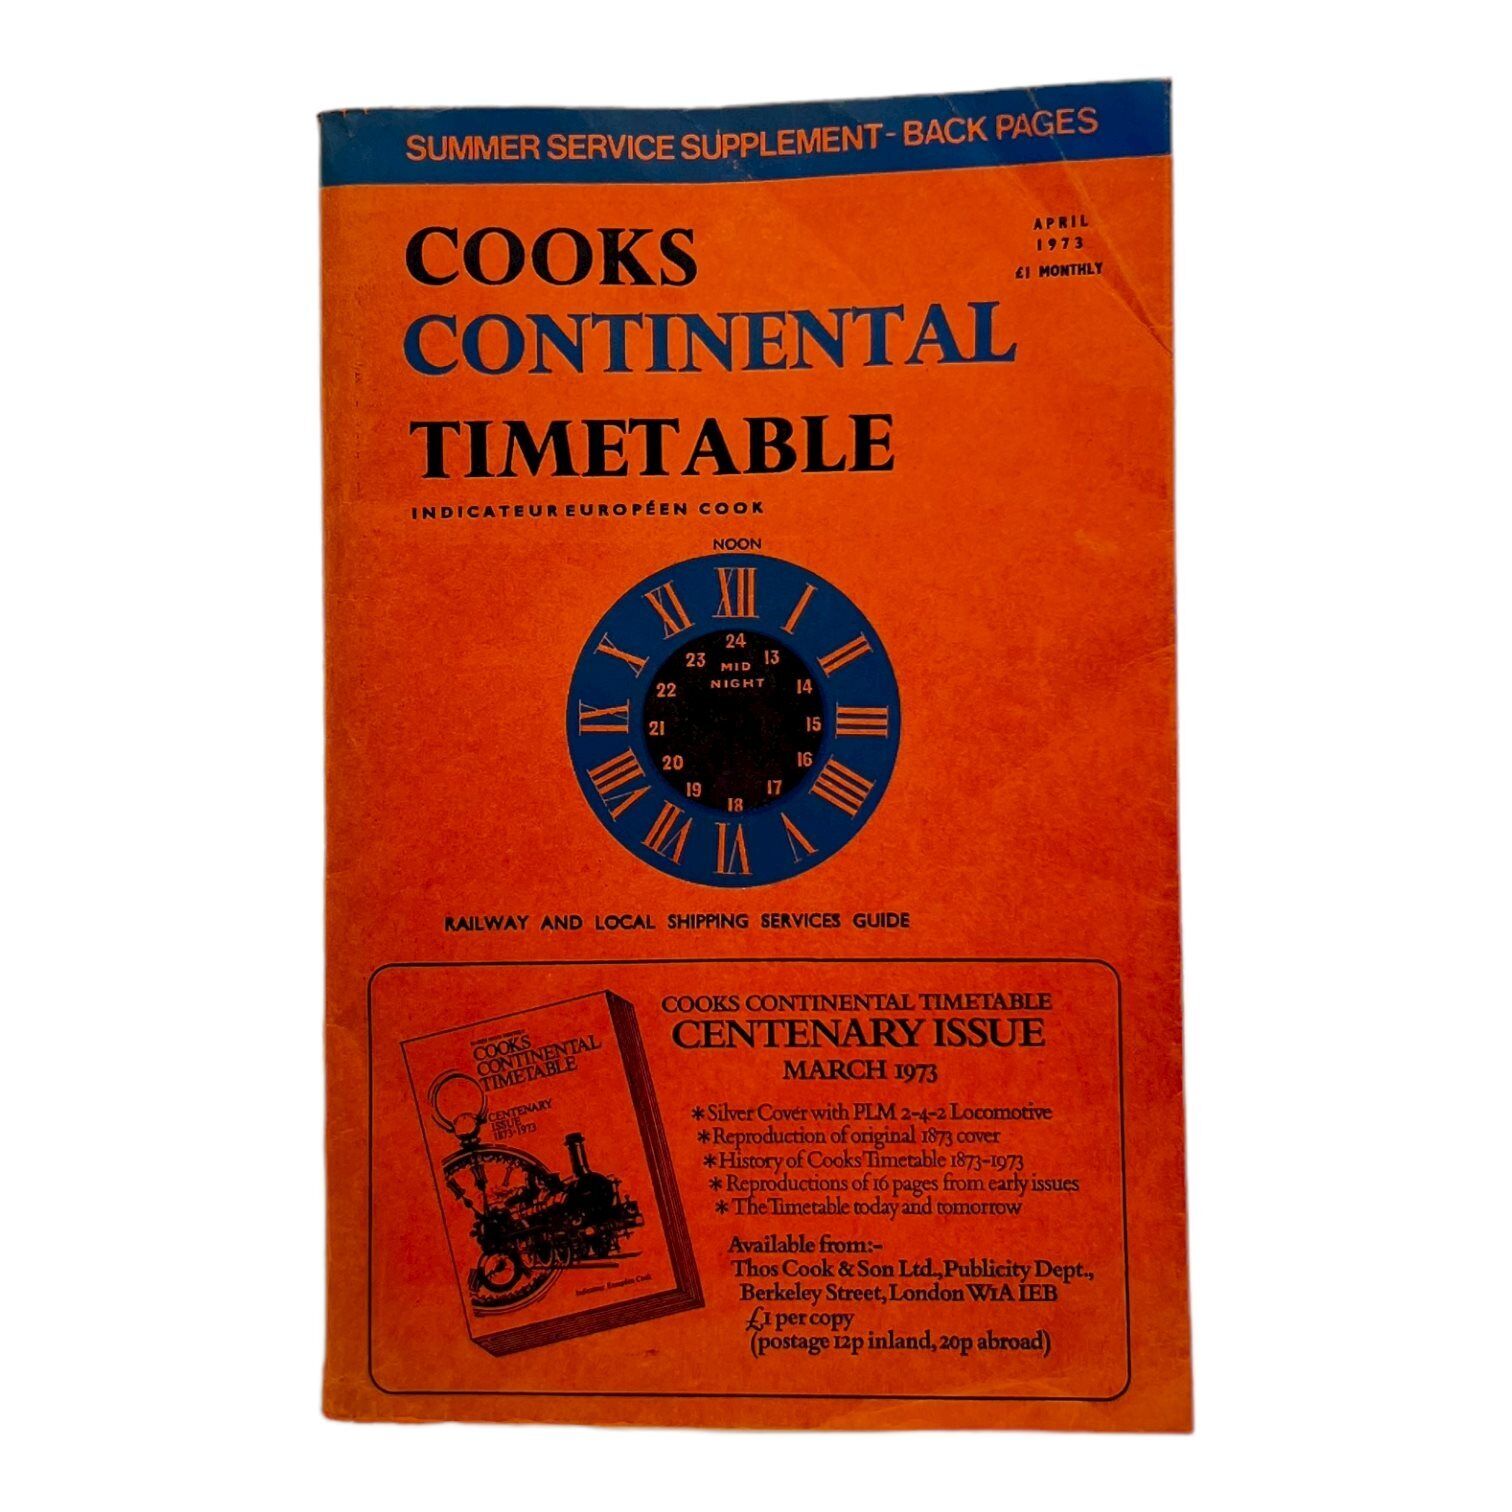 April 1973 Thomas Cook Continental Railway & Local Shipping Services Guide